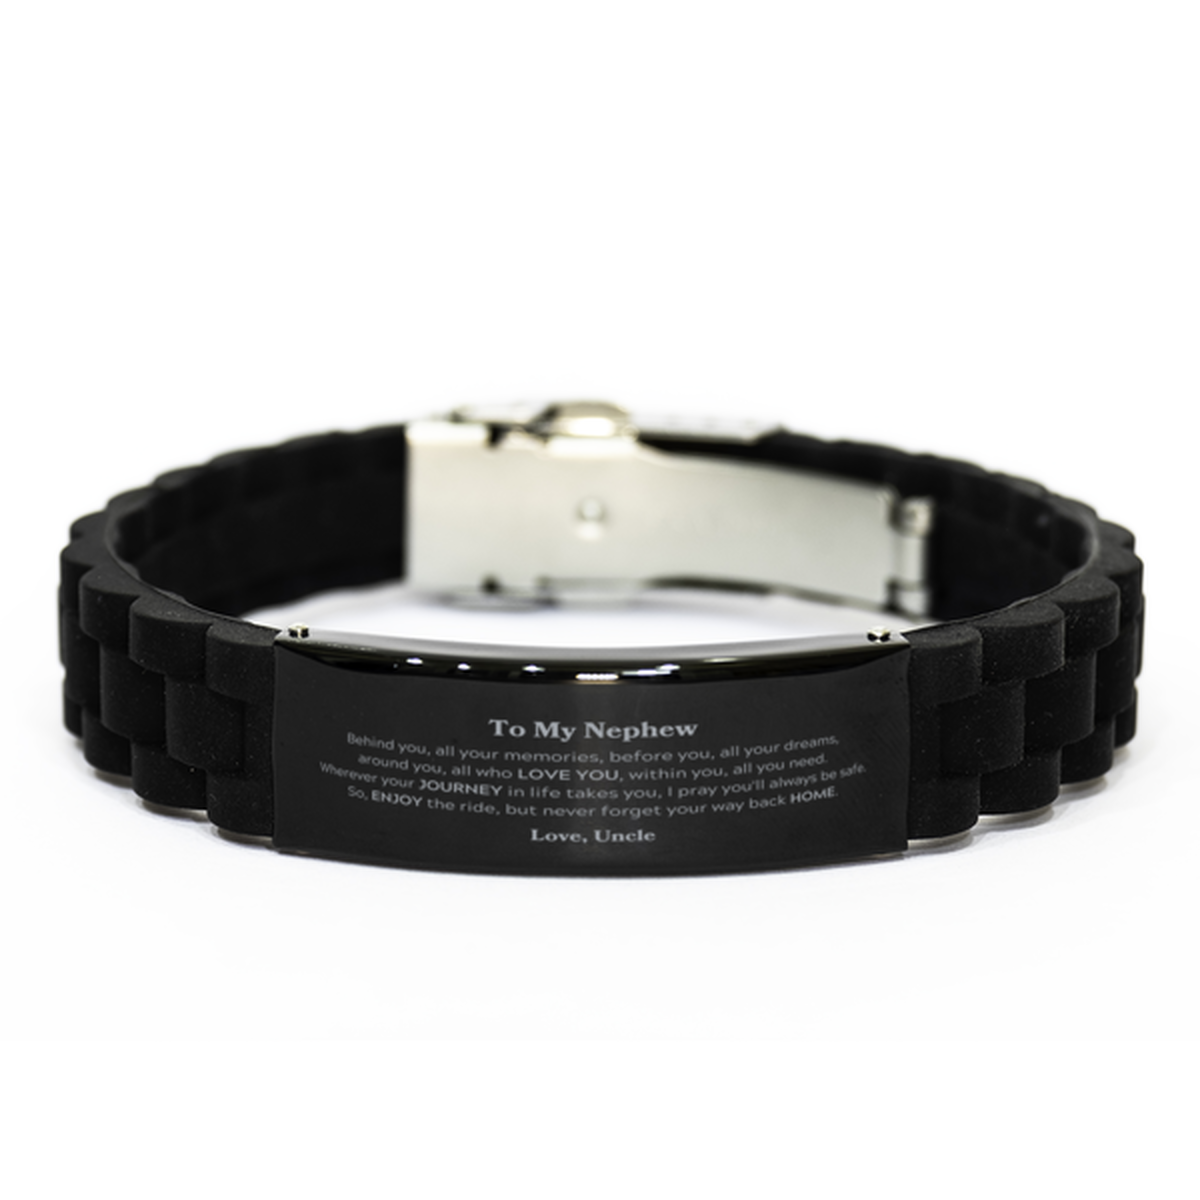 To My Nephew Graduation Gifts from Uncle, Nephew Black Glidelock Clasp Bracelet Christmas Birthday Gifts for Nephew Behind you, all your memories, before you, all your dreams. Love, Uncle